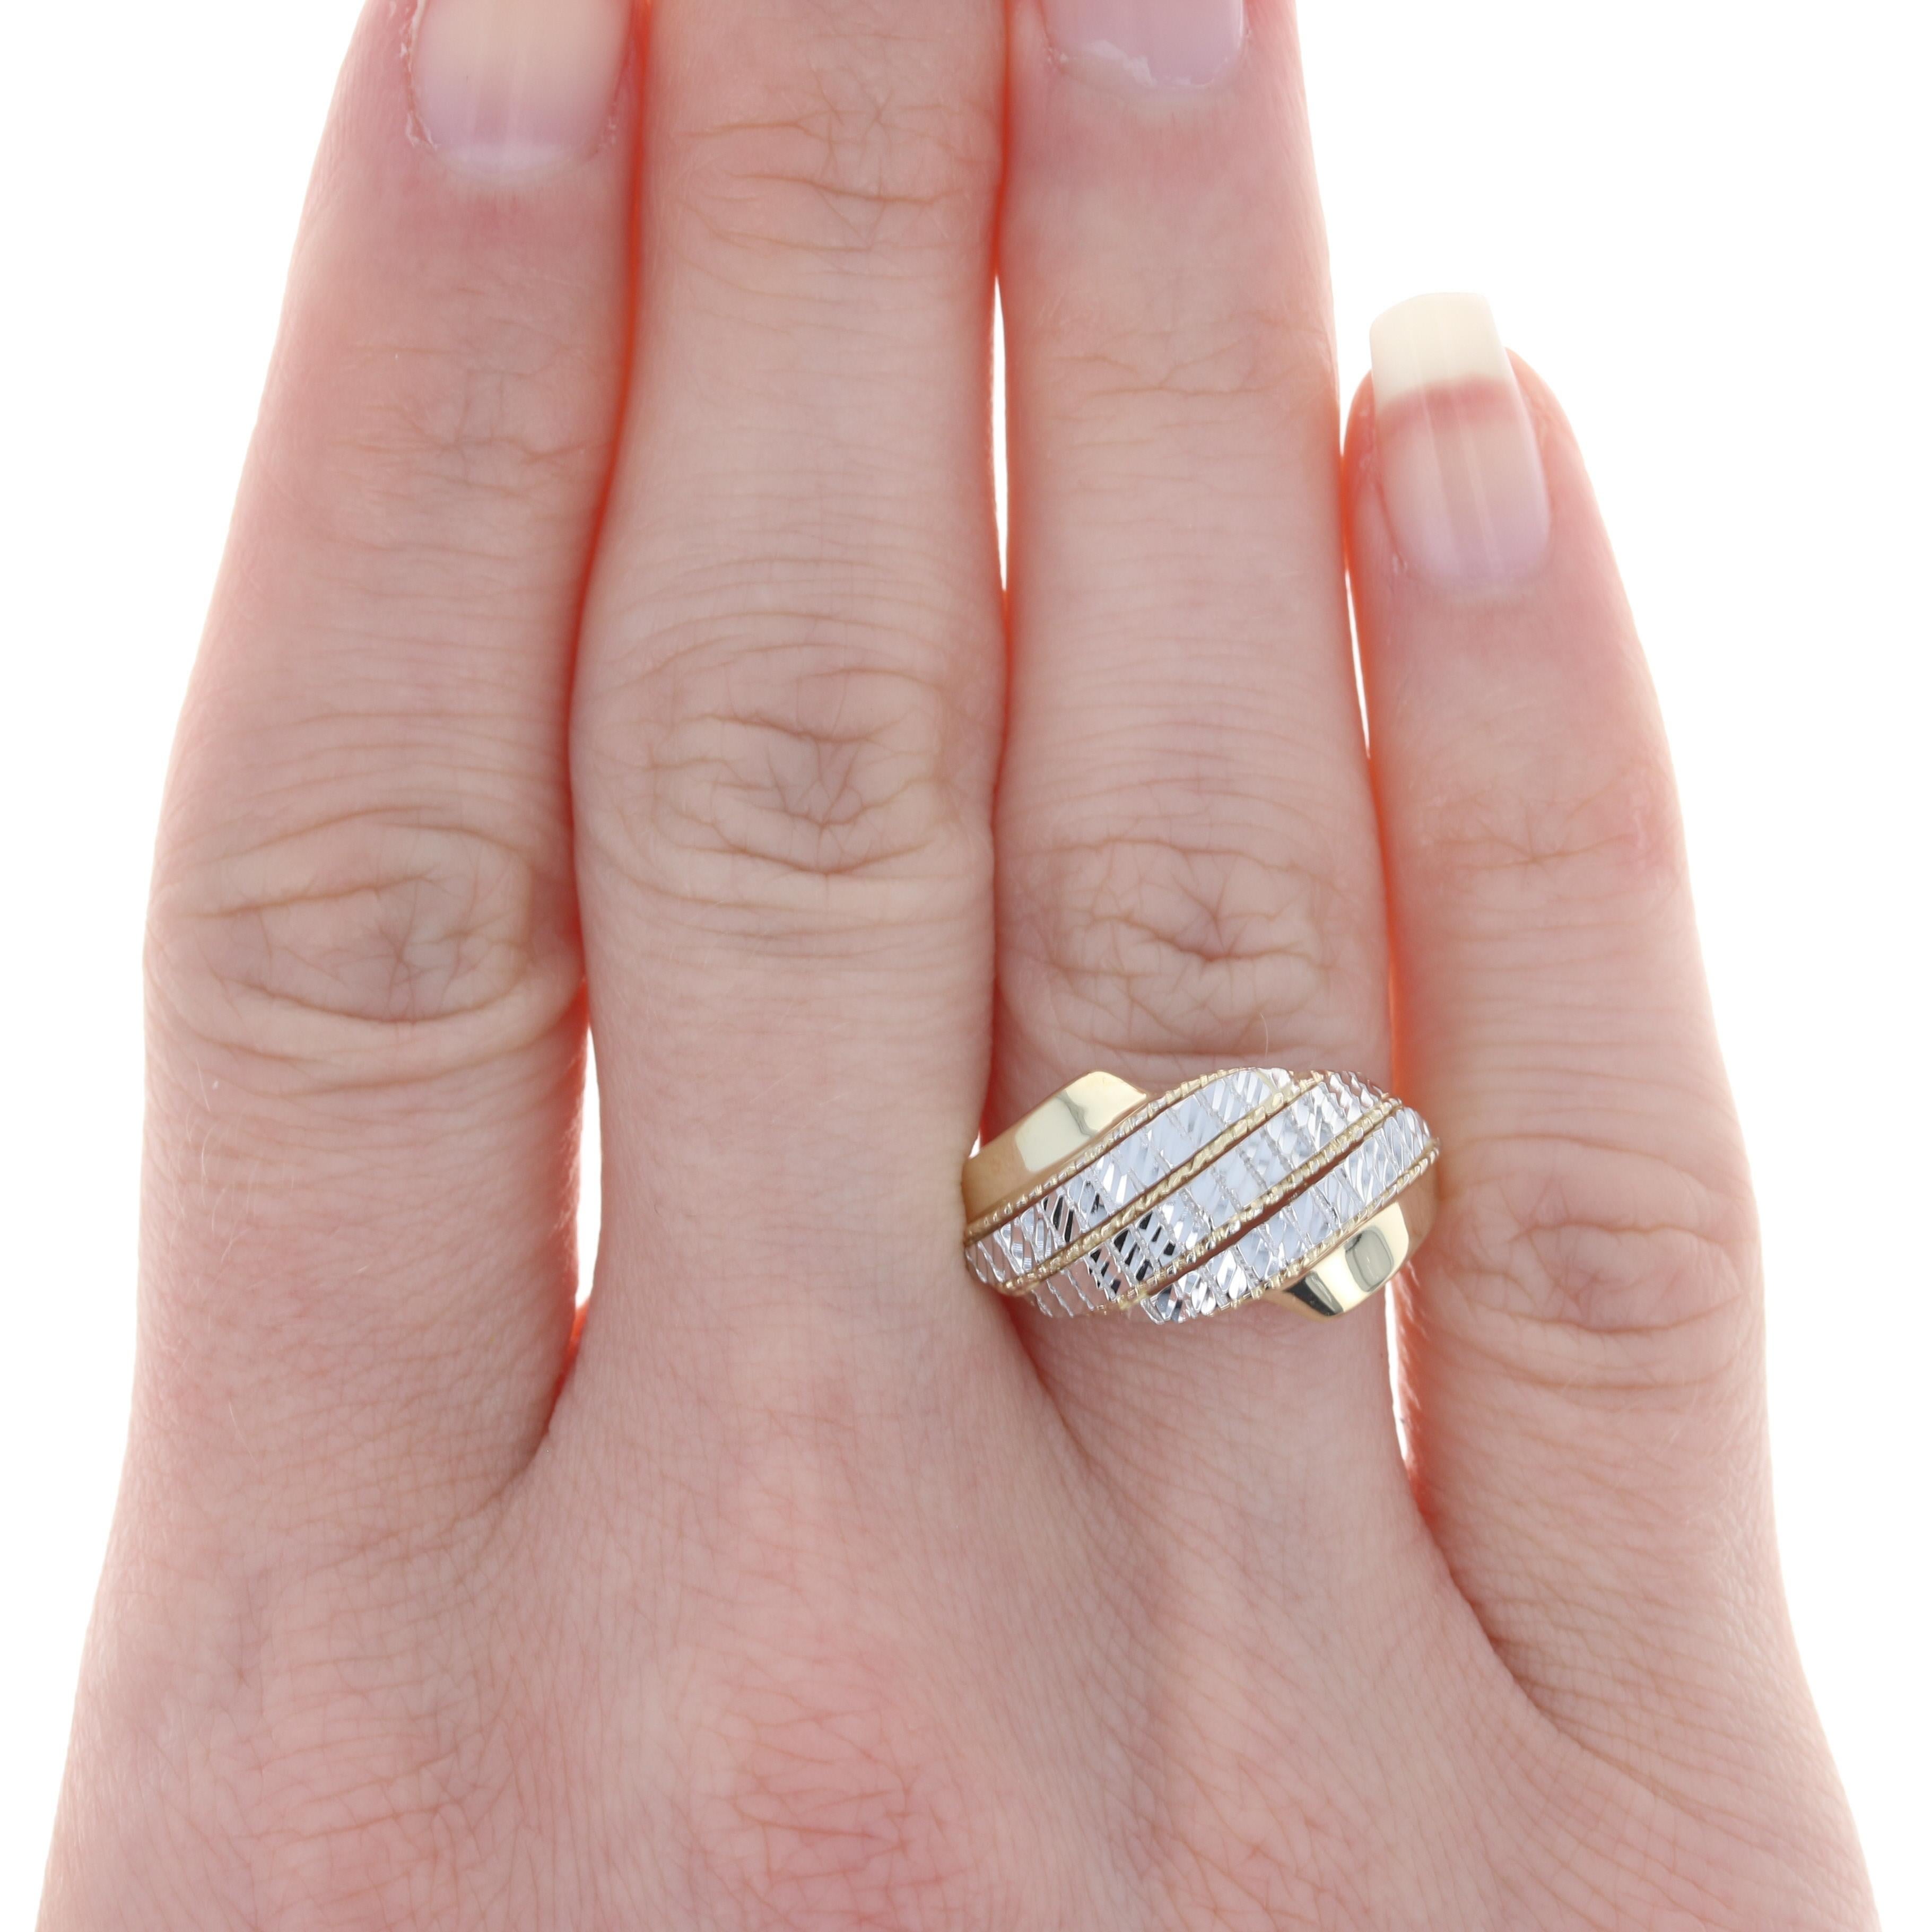 Size: 8
 Sizing Fee: Down 3 sizes for $20 or Up 2 sizes for $25
 
 Metal Content: 14k Yellow Gold & 14k White Gold
 
 Style: Statement Bypass
 Features: Smooth & Textured Finishes
 
 Face Height (north to south): 7/16